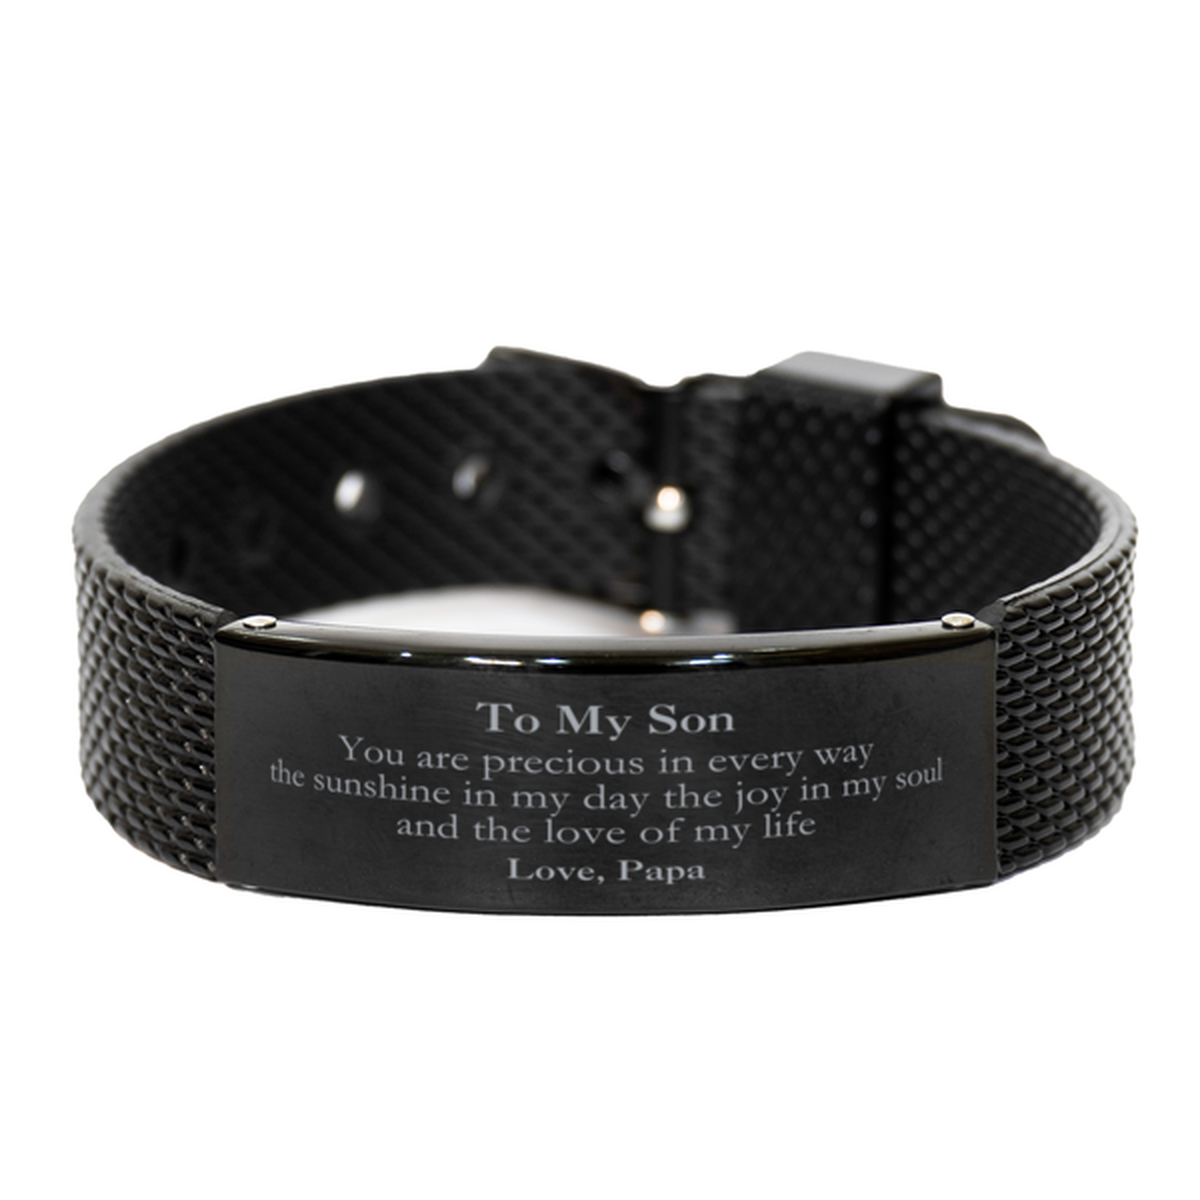 Graduation Gifts for Son Black Shark Mesh Bracelet Present from Papa, Christmas Son Birthday Gifts Son You are precious in every way the sunshine in my day. Love, Papa